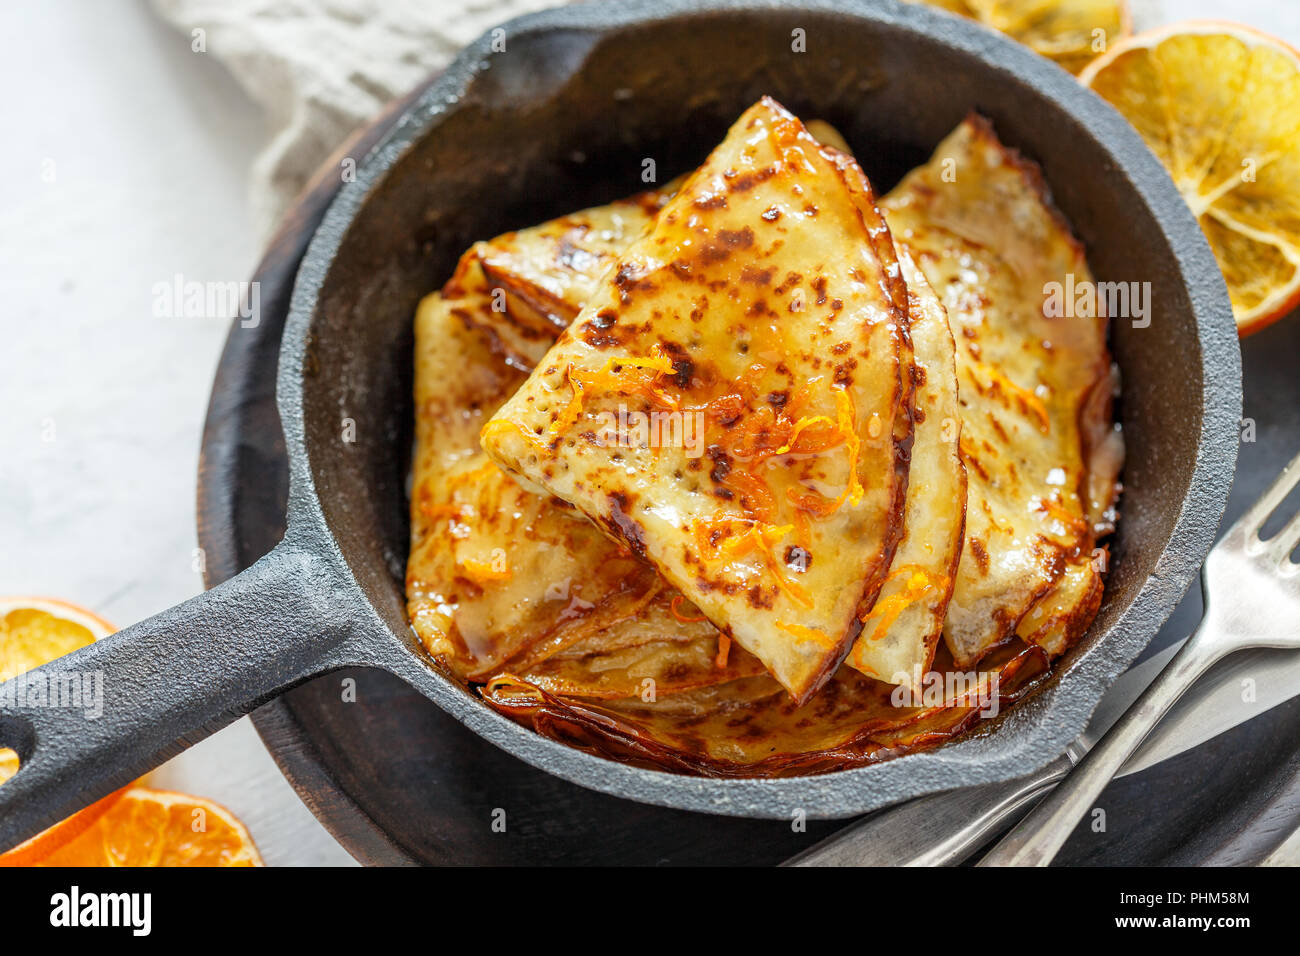 https://c8.alamy.com/comp/PHM58M/traditional-french-crepes-with-orange-sauce-close-up-PHM58M.jpg